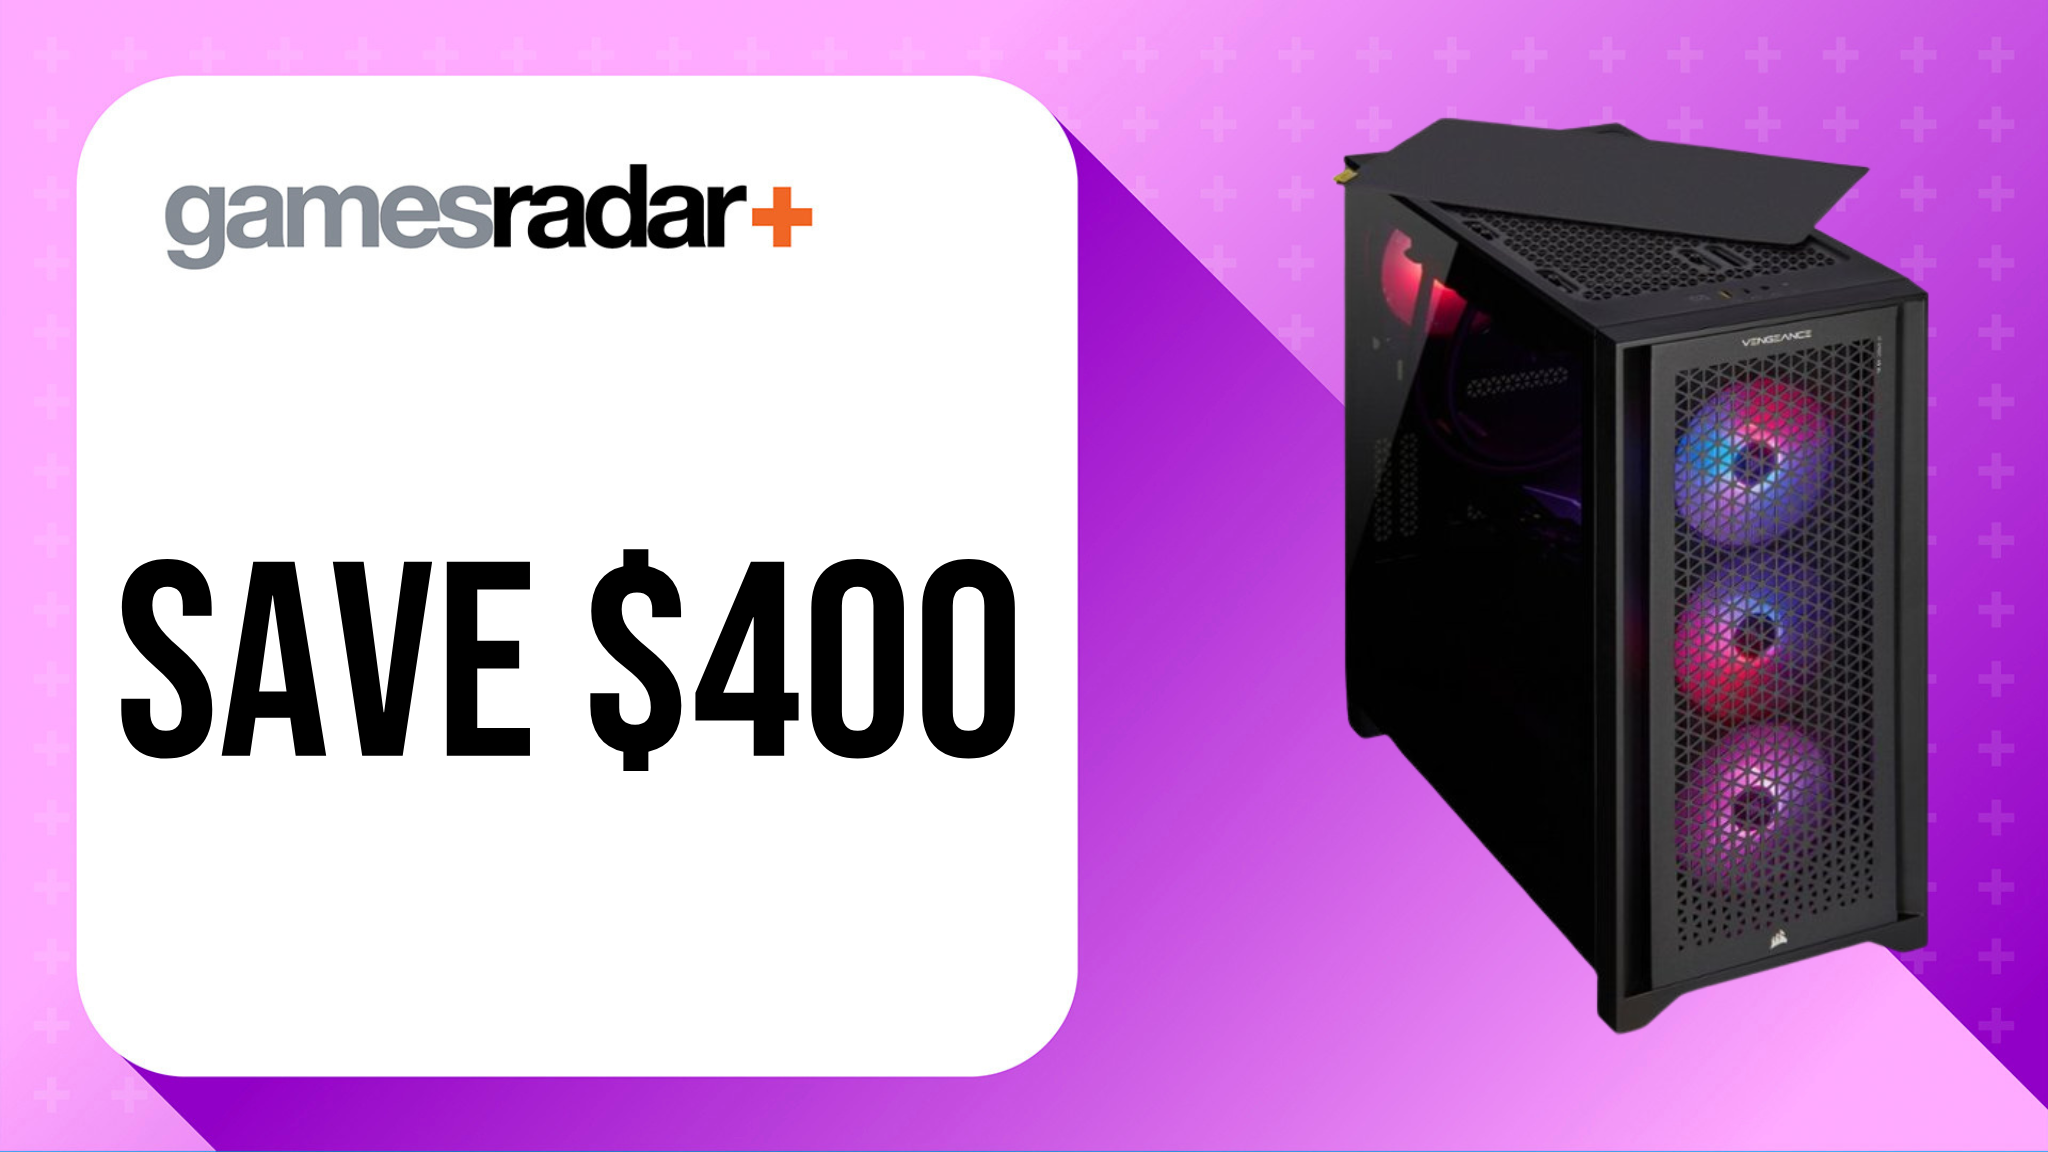 Corsair Vengeance i7200 Gaming Desktop deal image with $400 saving stamp and purple background